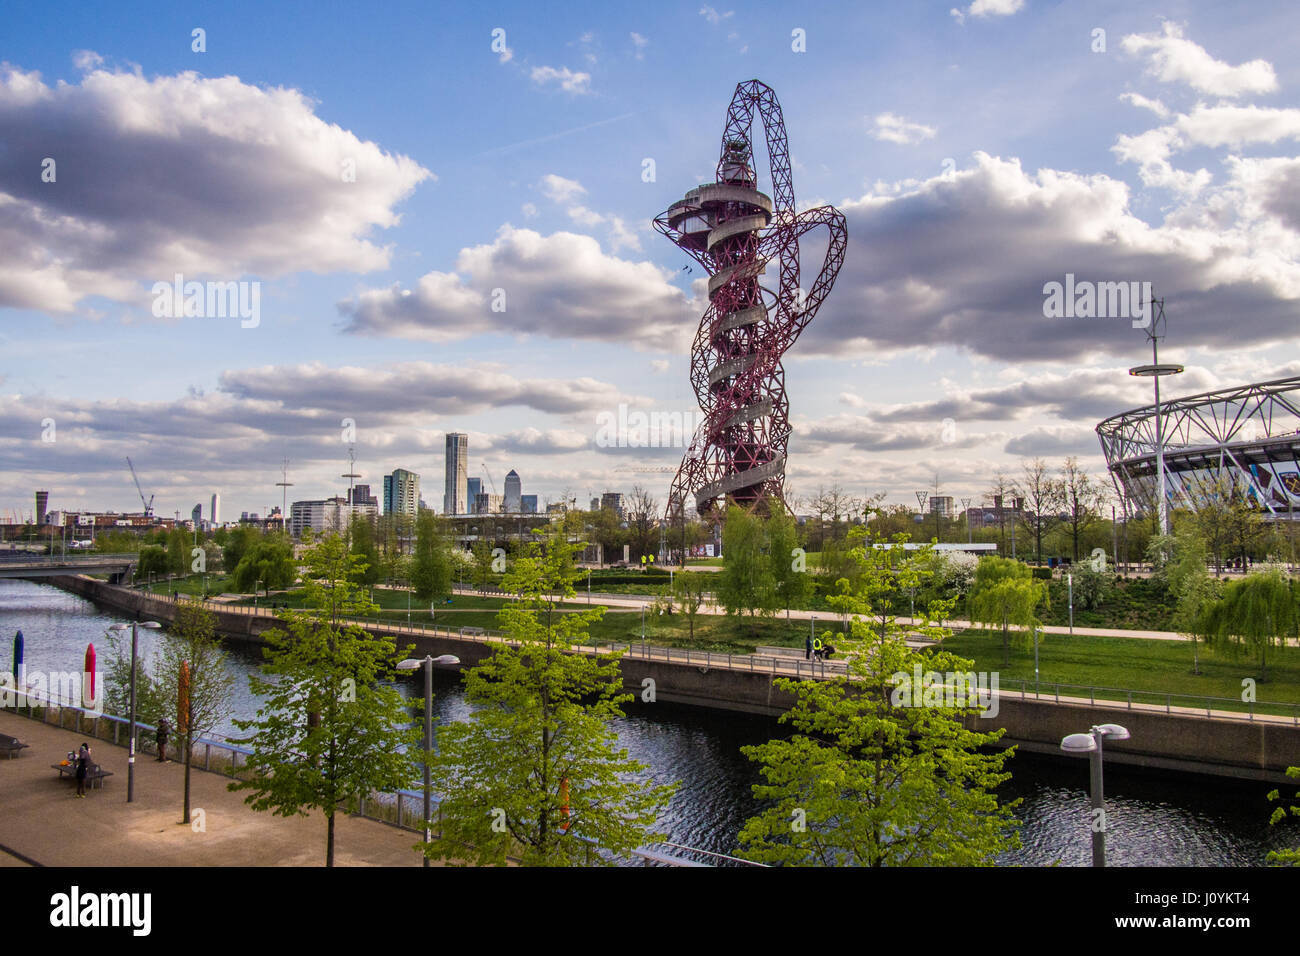 ArcelorMittal Orbit steel structure with tube slide, Olympic Park,  London Stock Photo